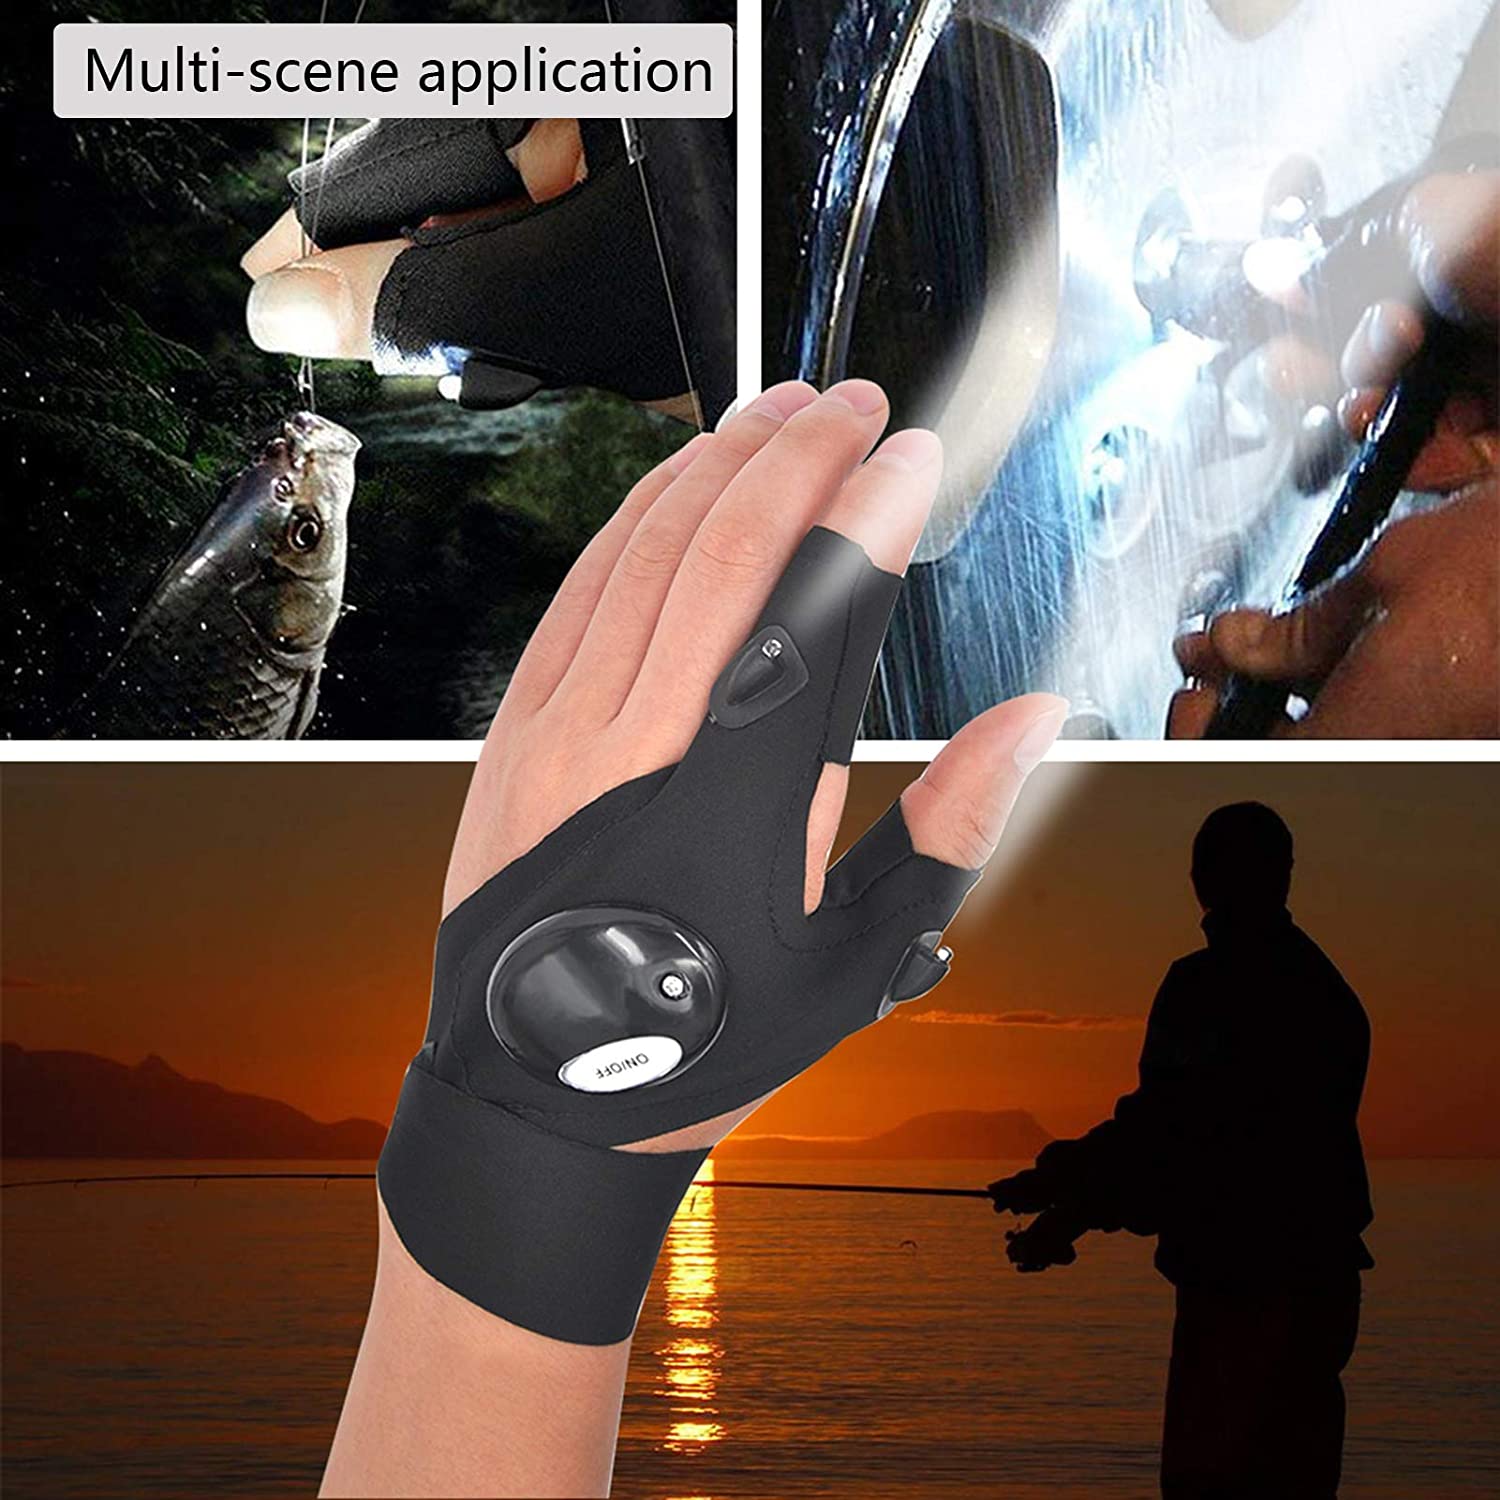 Portable Multi-function Magic Strap Thumb Index Finger 2 Gloves with LED Light (1 Pair)